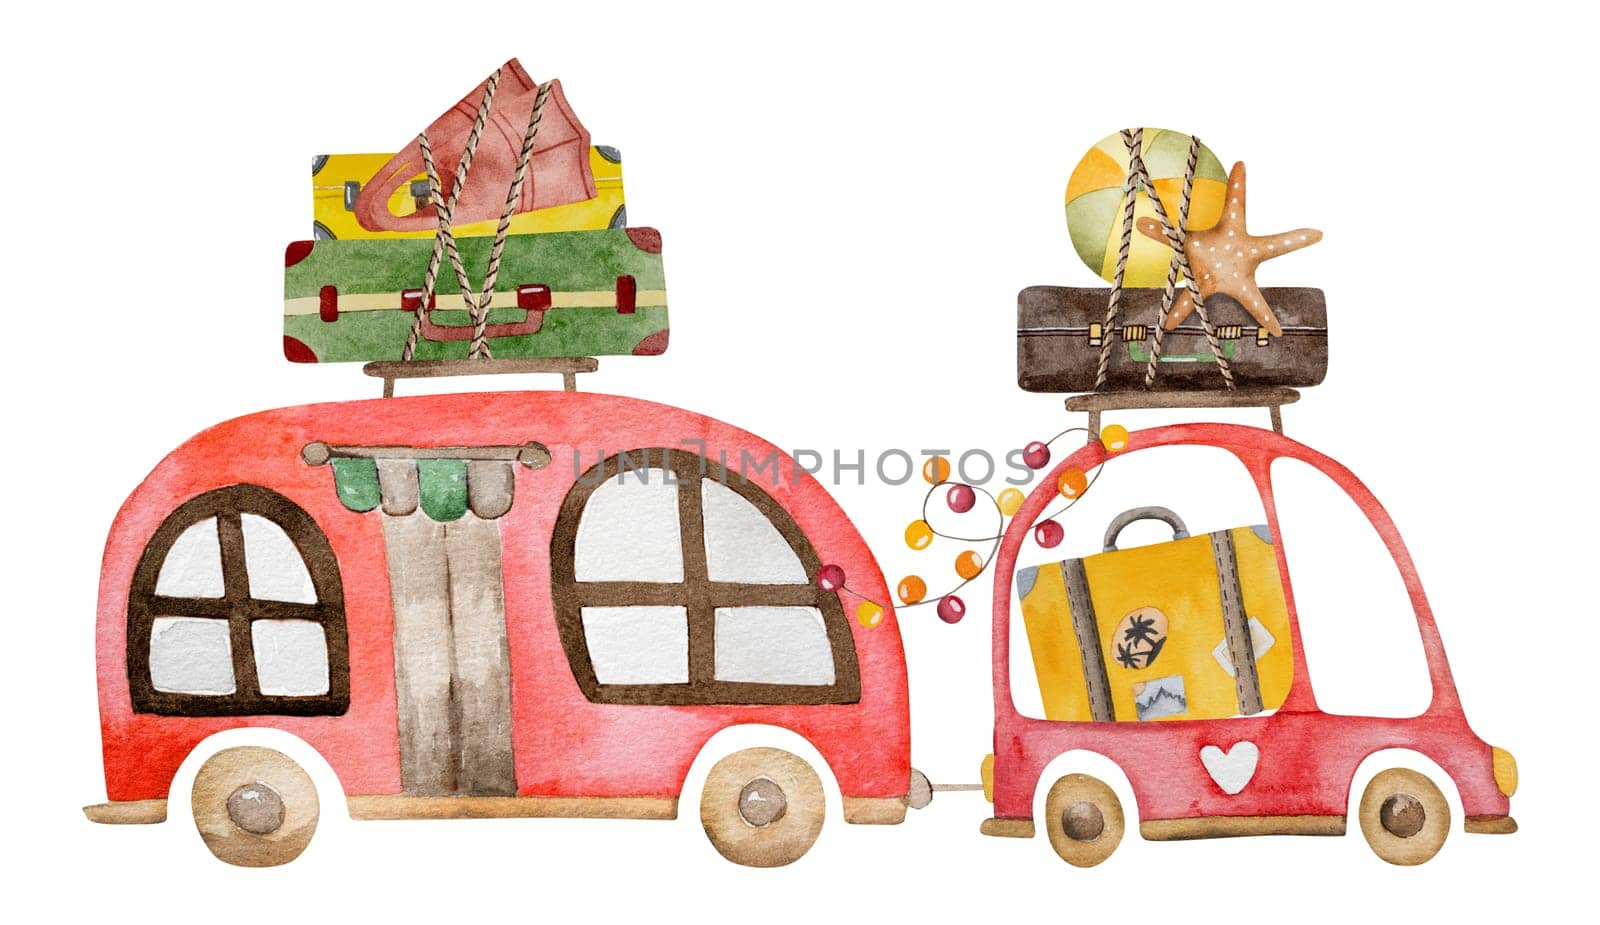 Hand-Painted Watercolor Of Car And Mobile Home Going On Vacation With Suitcases On Roof by tan4ikk1